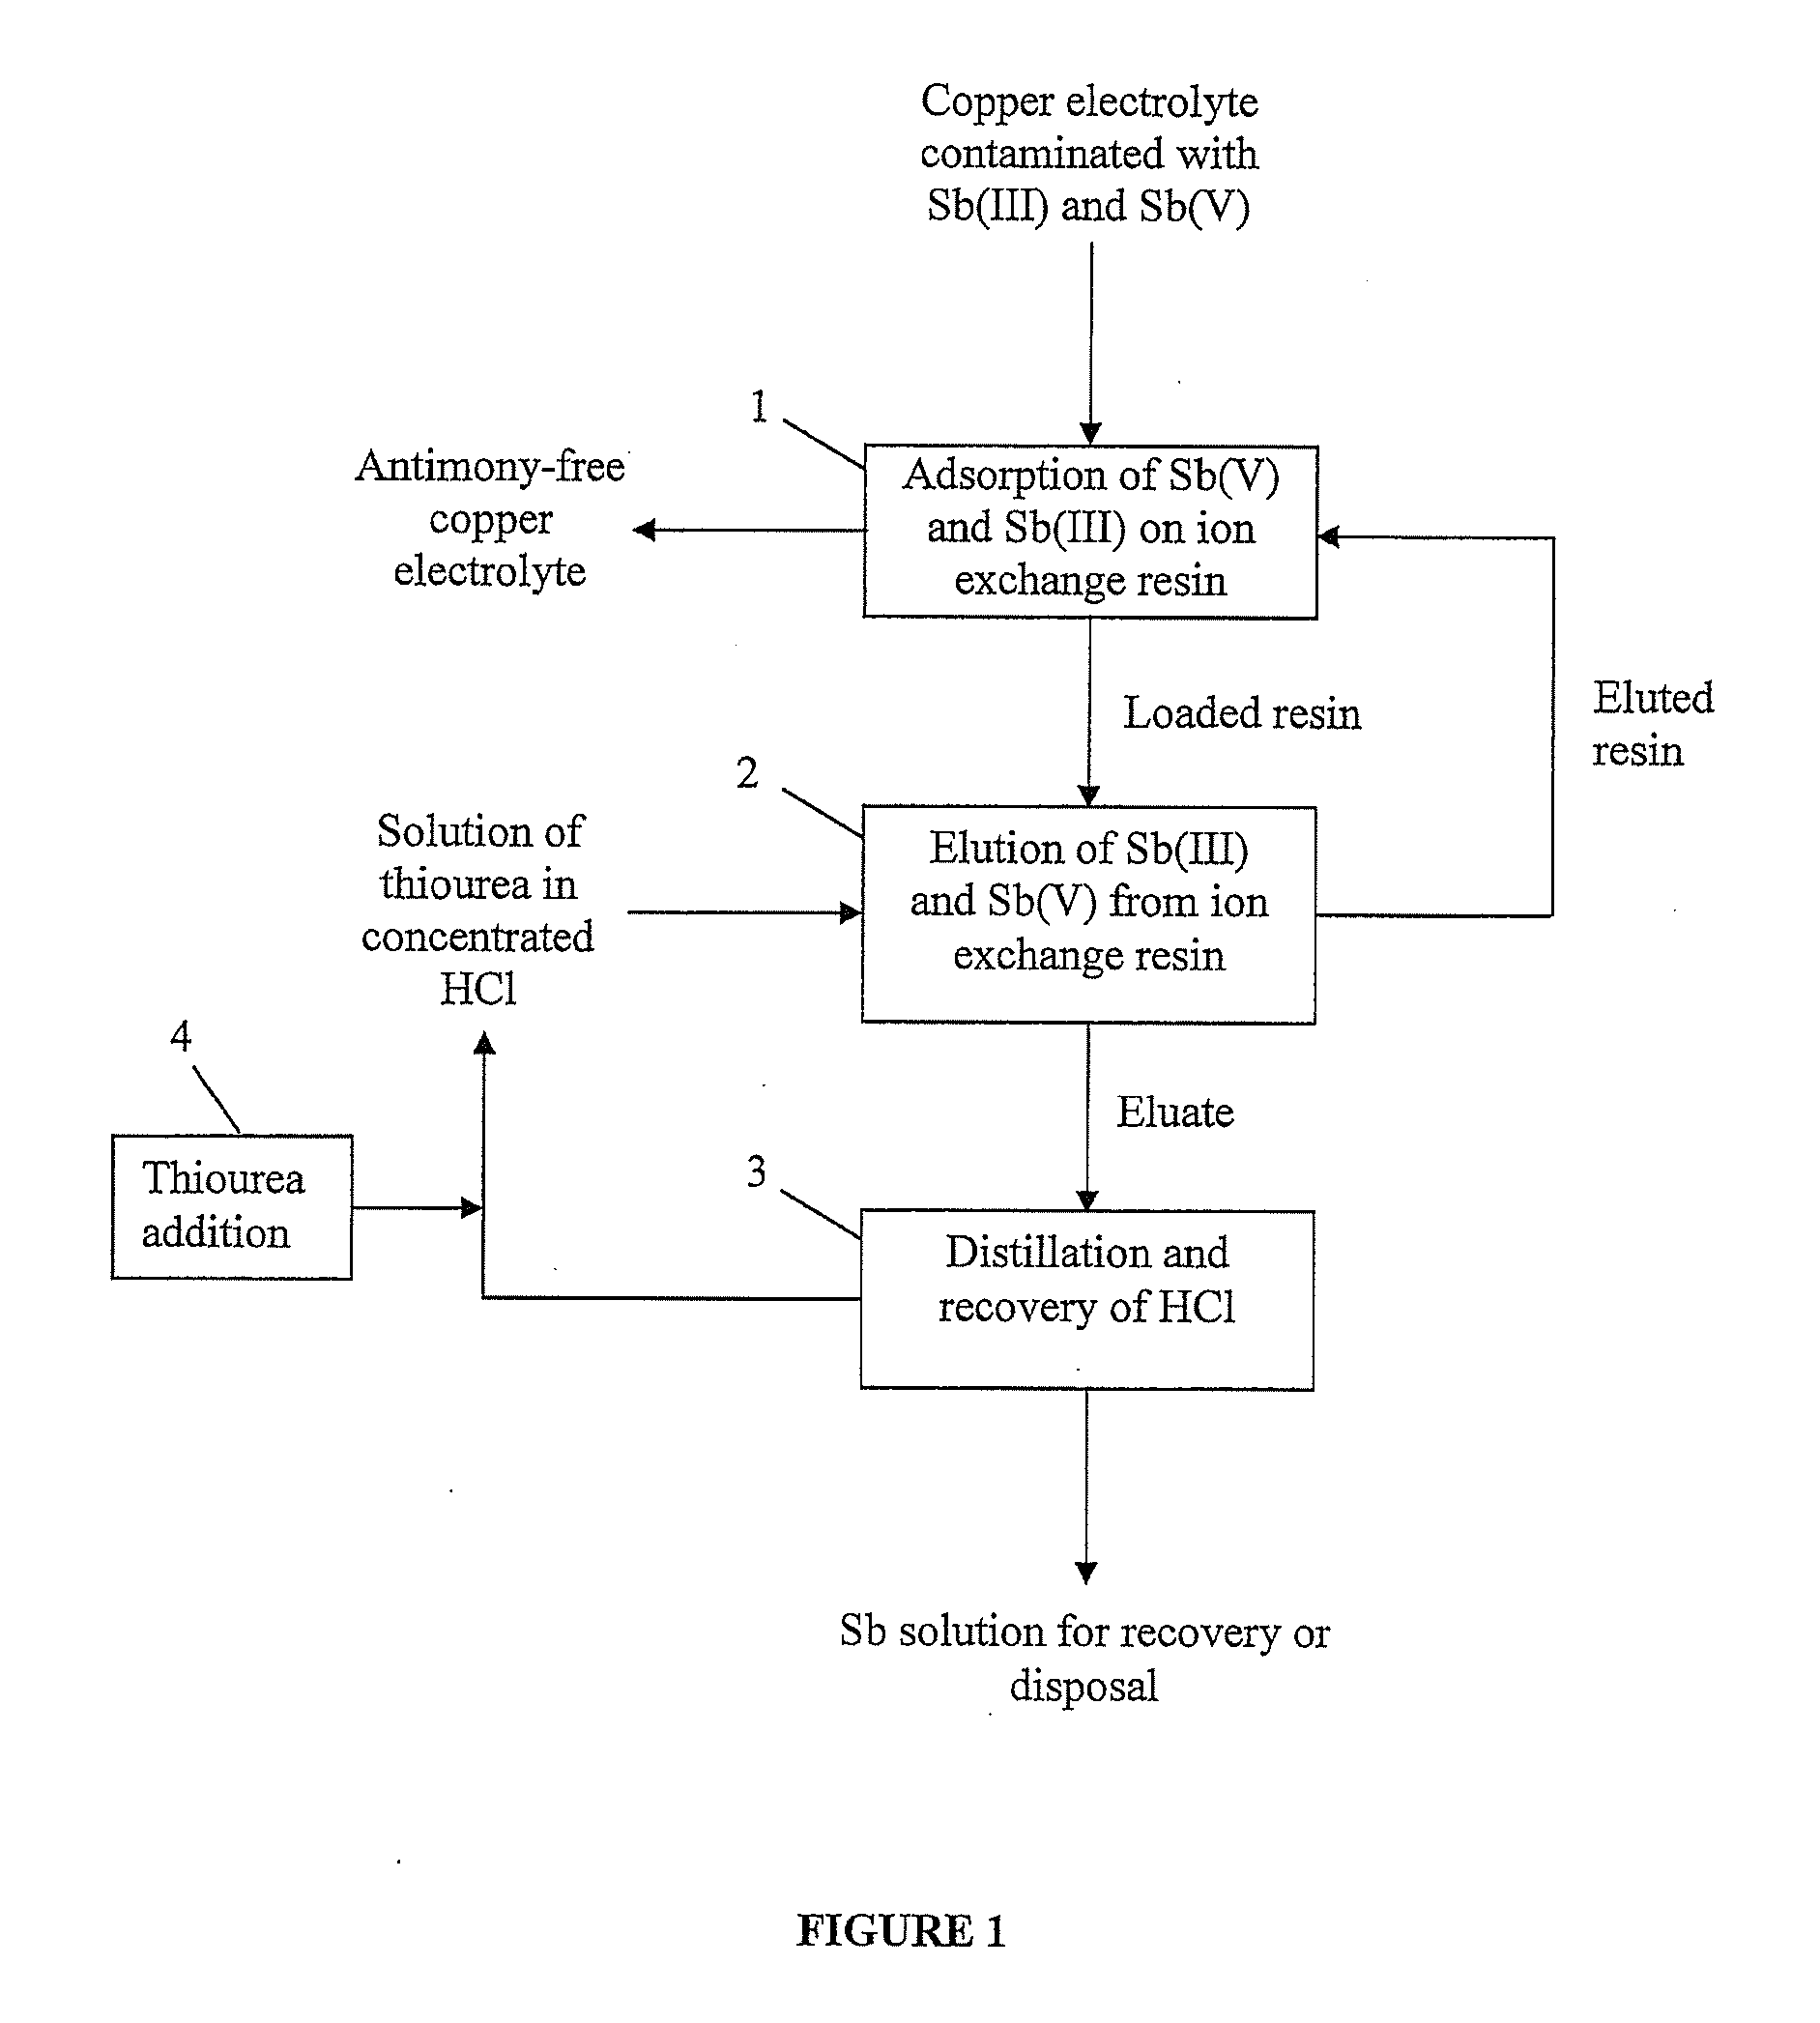 Method to remove antimony from copper electrolytes